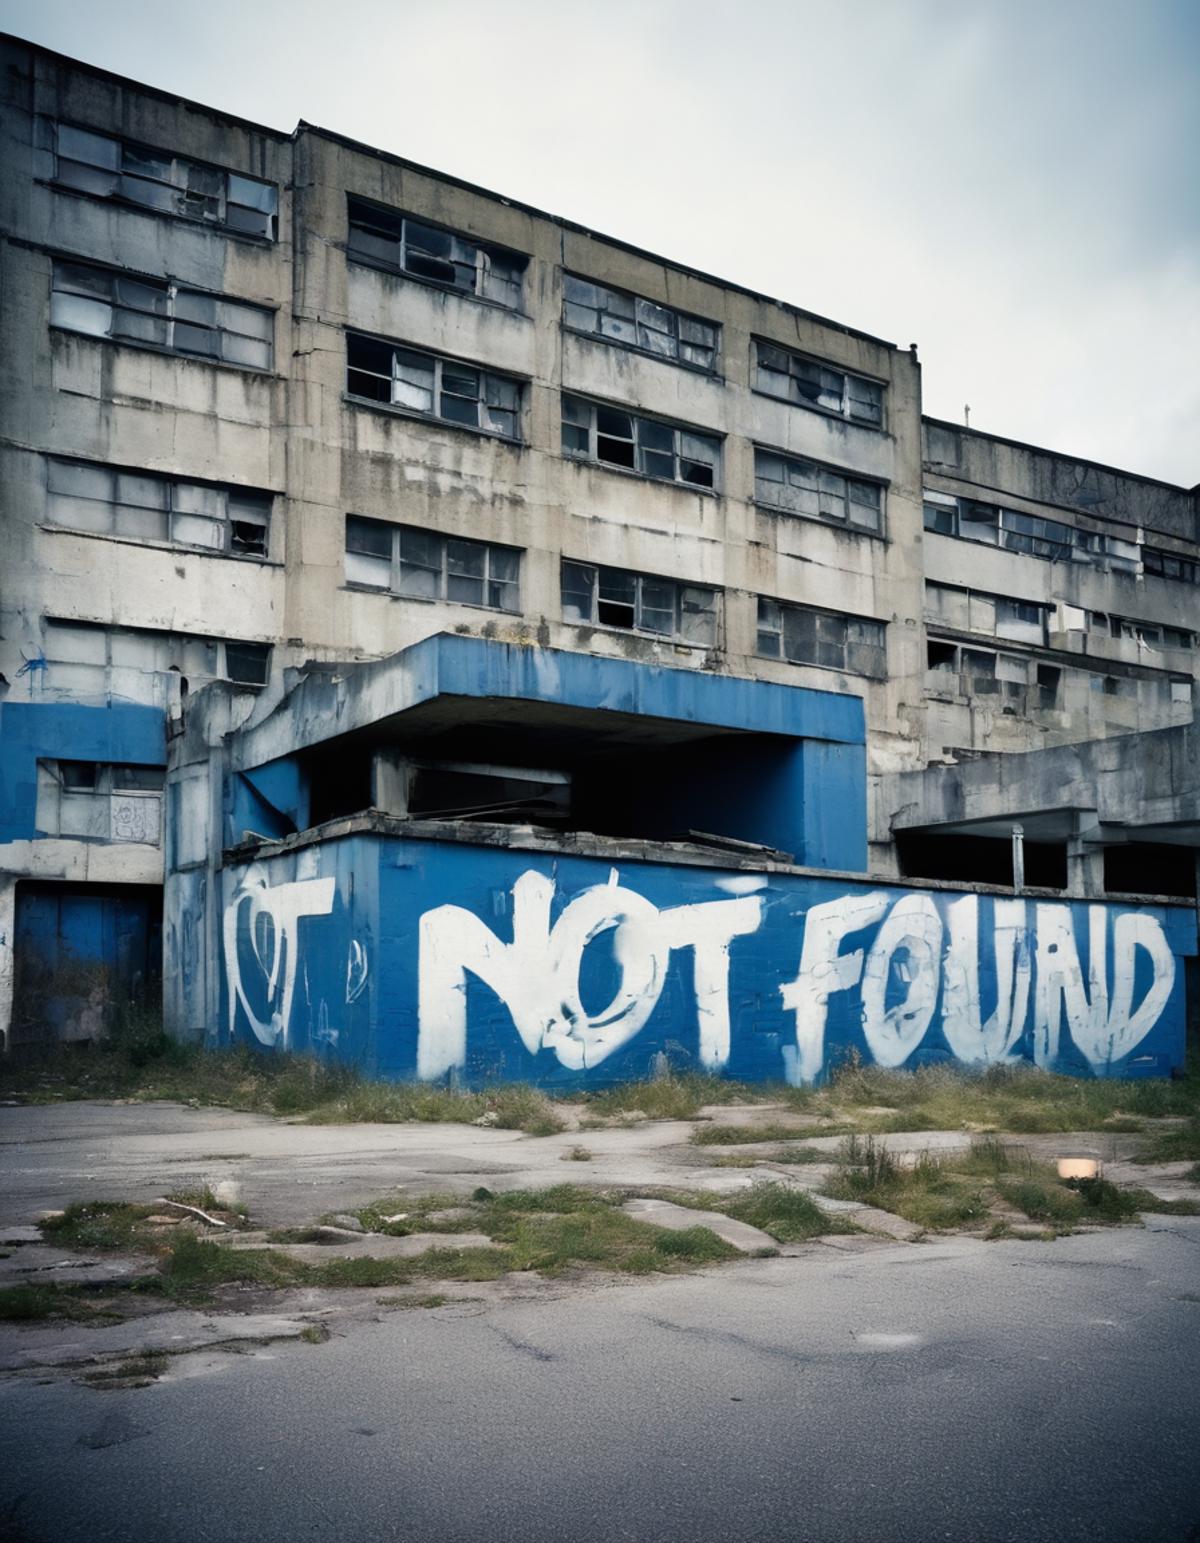 Graffiti on the side of a building that says "not found".